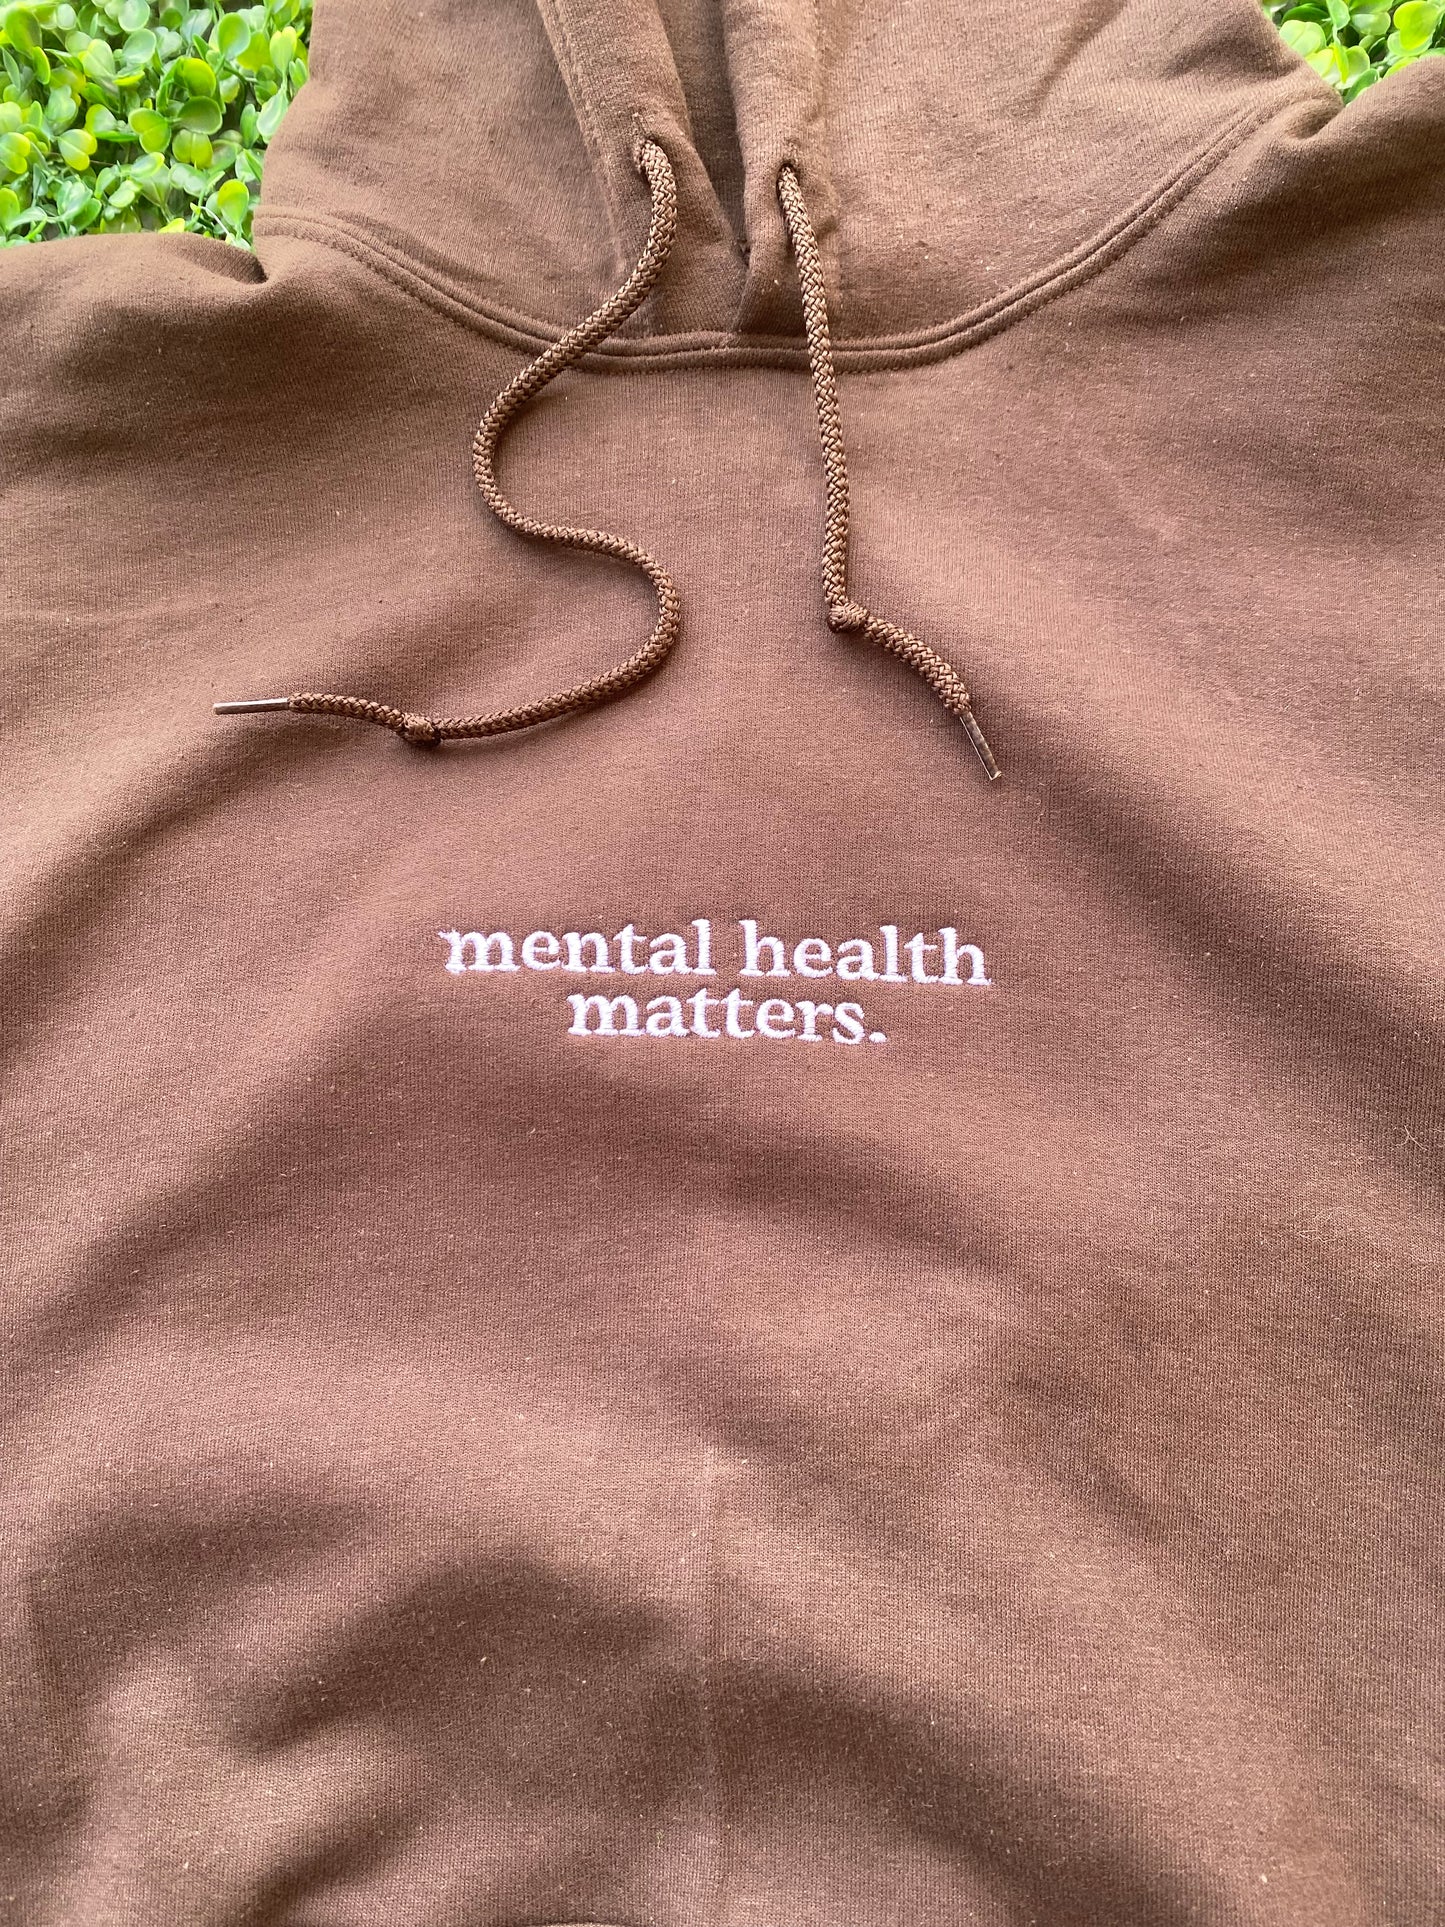 Embroidered 'Mental health matters' Hoodie or Crew Neck, Long Sleeve, Classic fit, Unisex, Adult